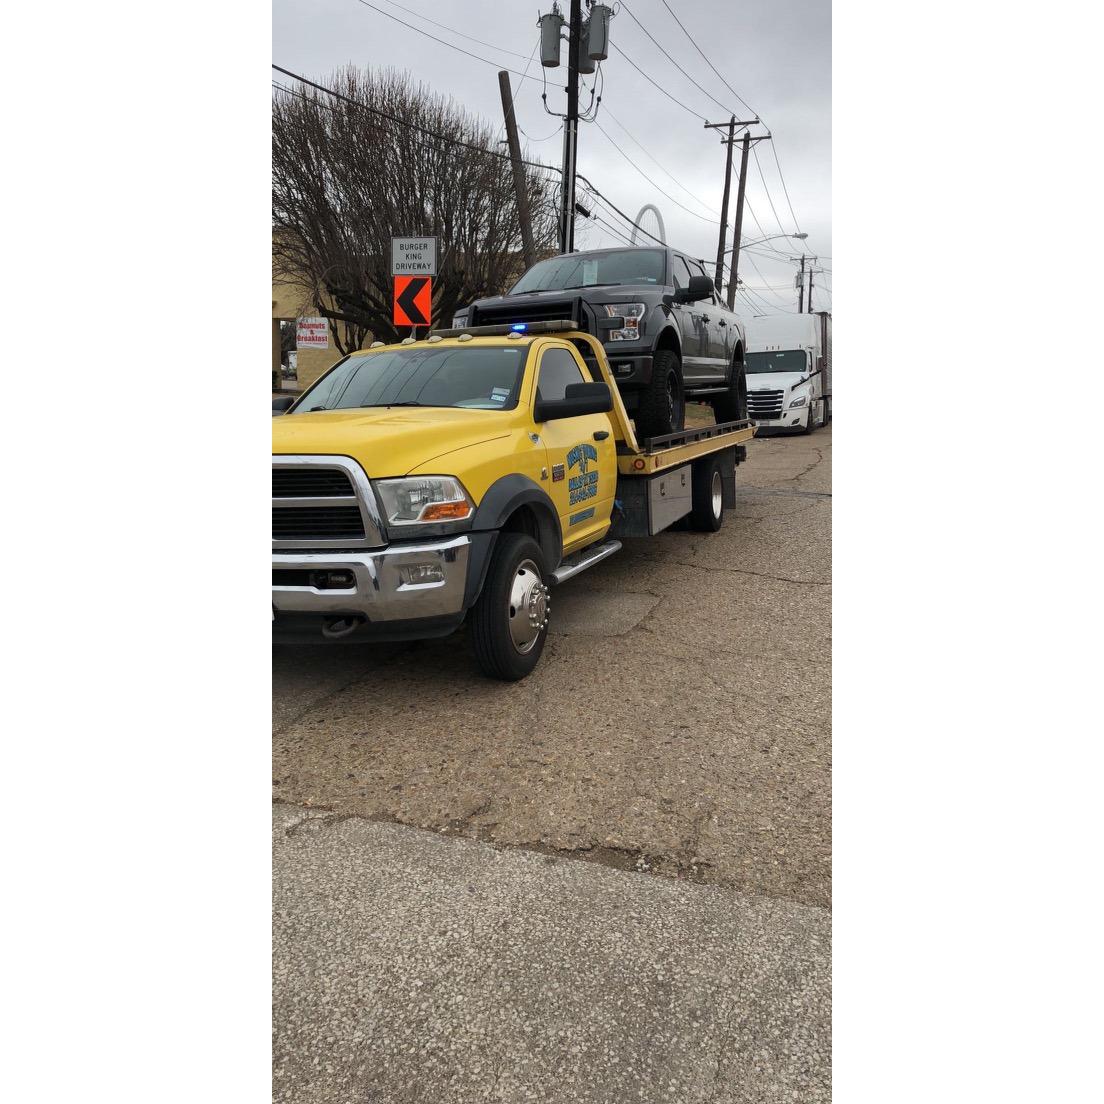 Muskic Towing - Dallas, TX 75238 - (469)774-5845 | ShowMeLocal.com